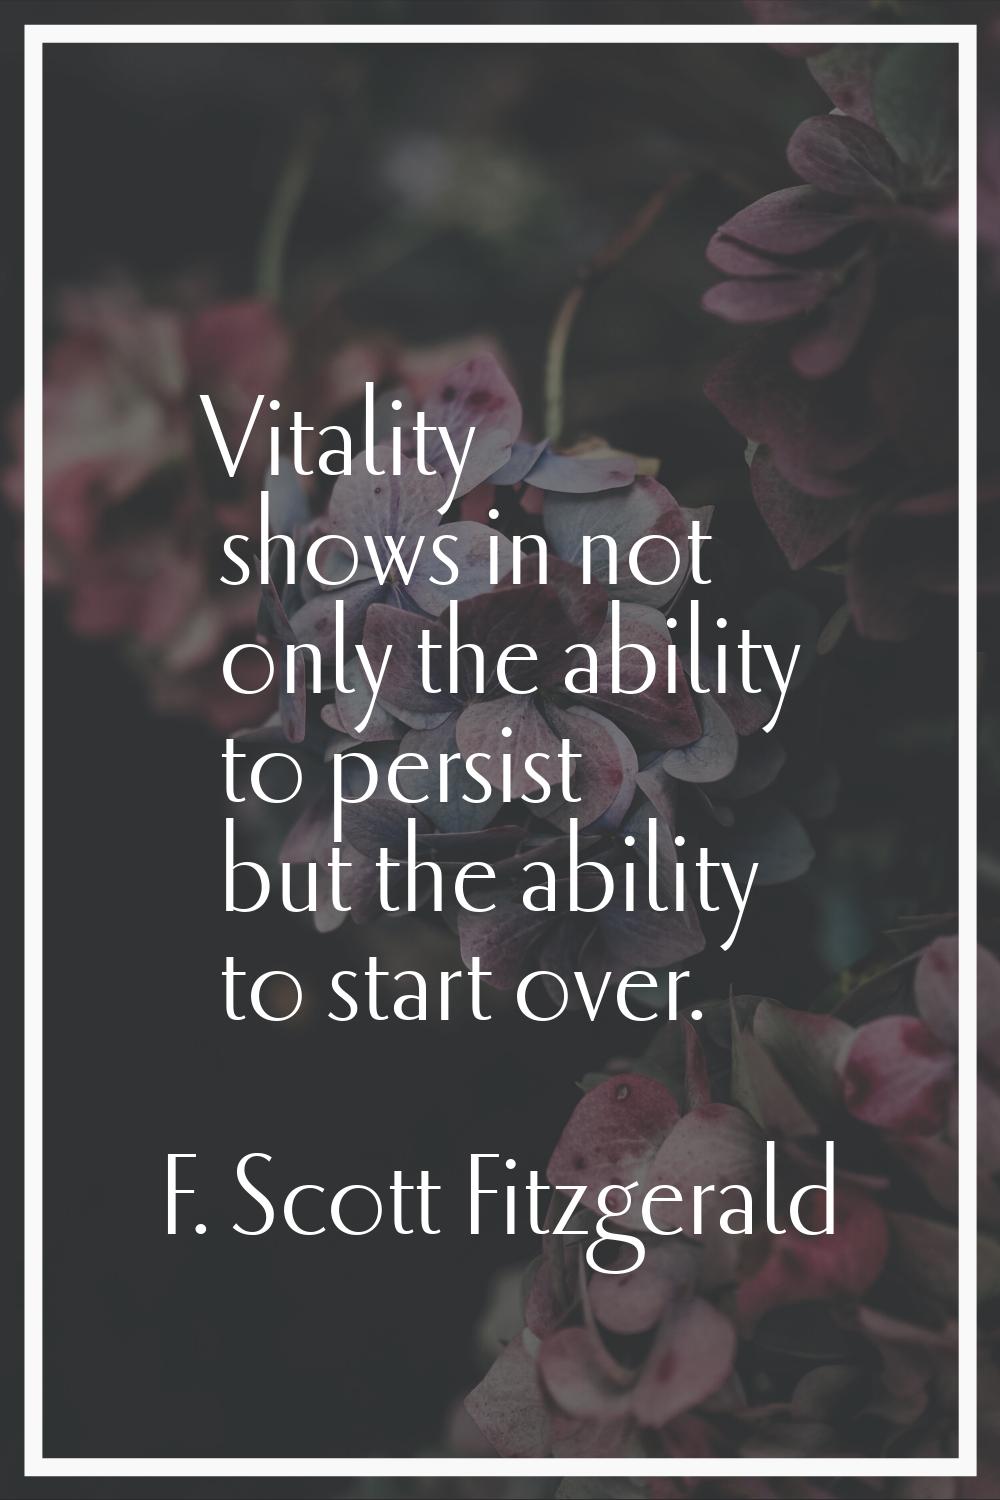 Vitality shows in not only the ability to persist but the ability to start over.